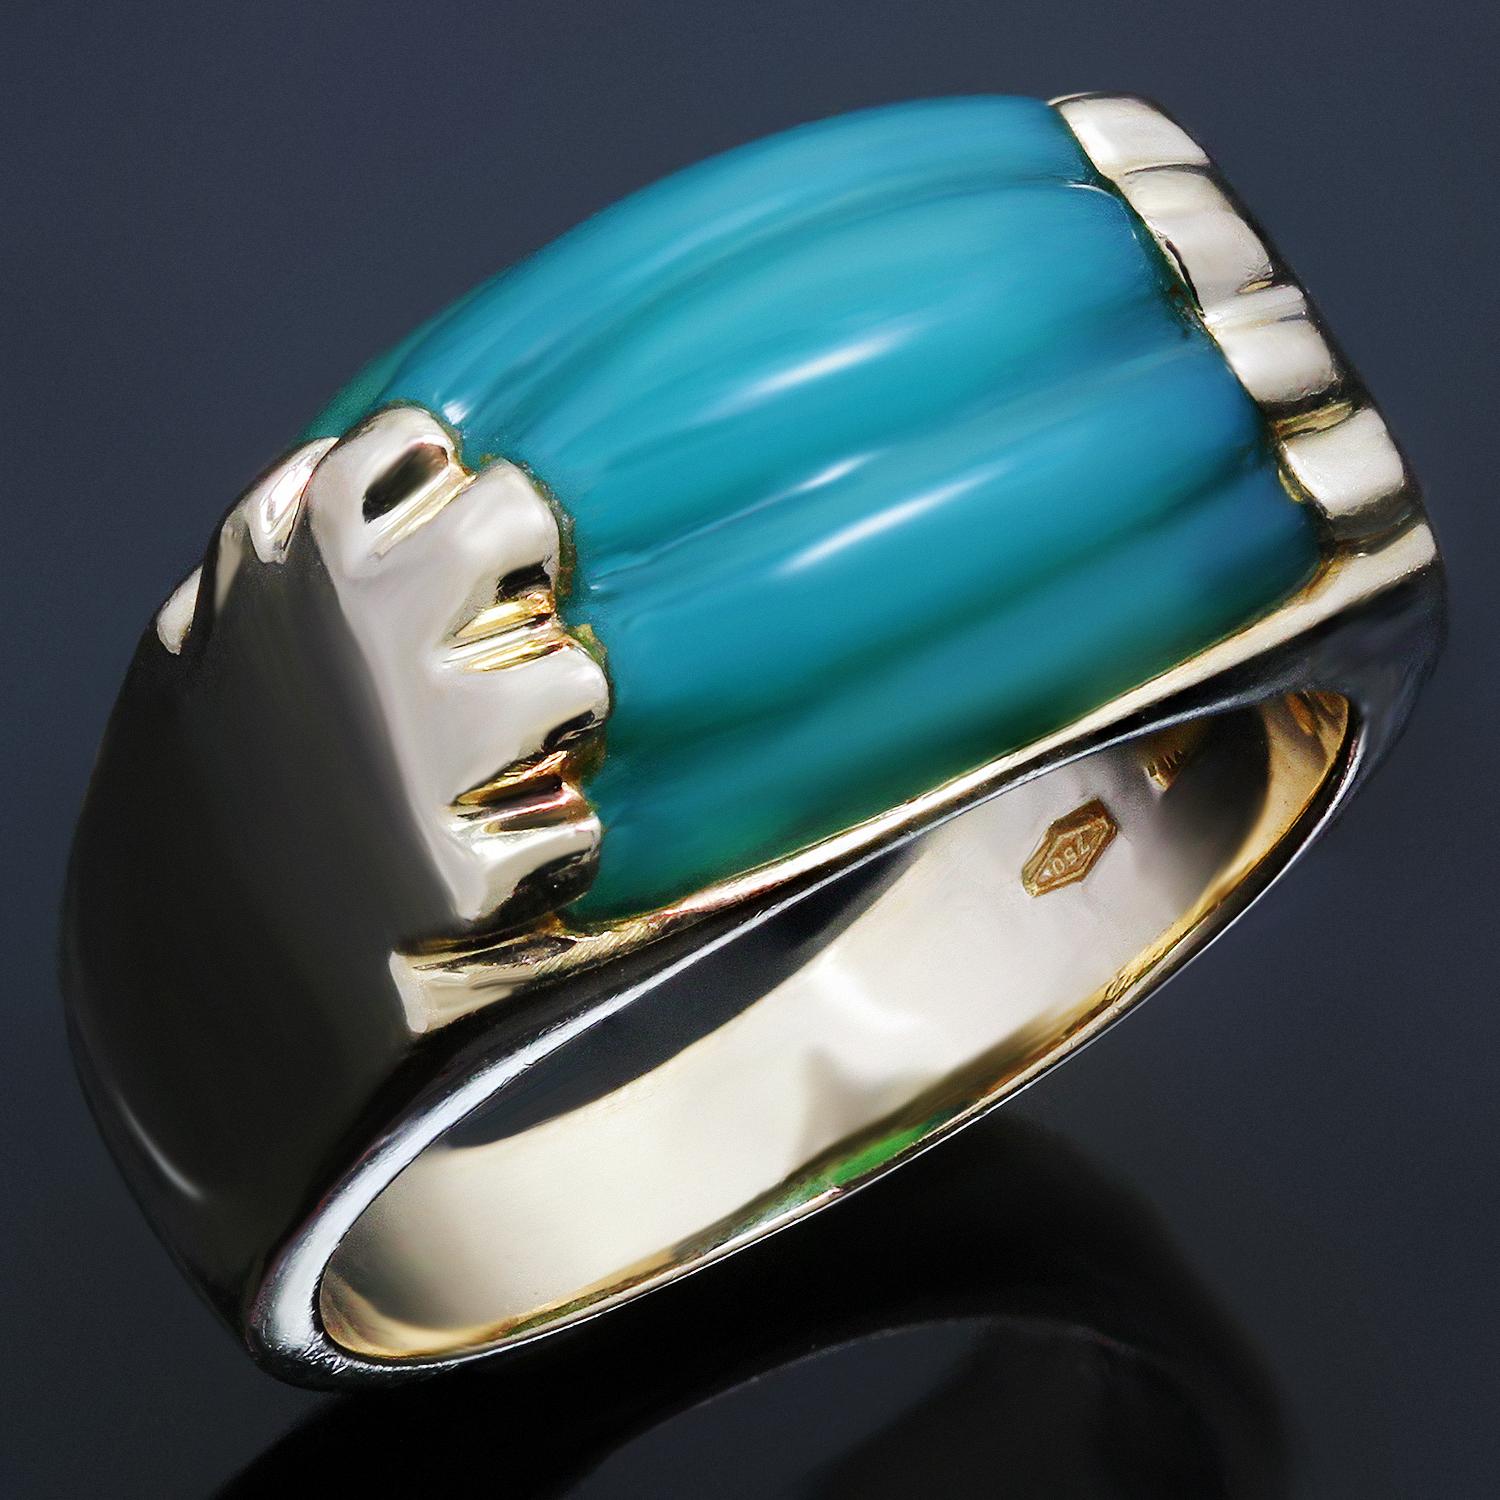 This gorgeous Bvlgari ring from the chic Tronchetto collection is crafted in 18k yellow gold and set with green chrysoprase. Made in Italy circa 2000s. Measurements: 0.38